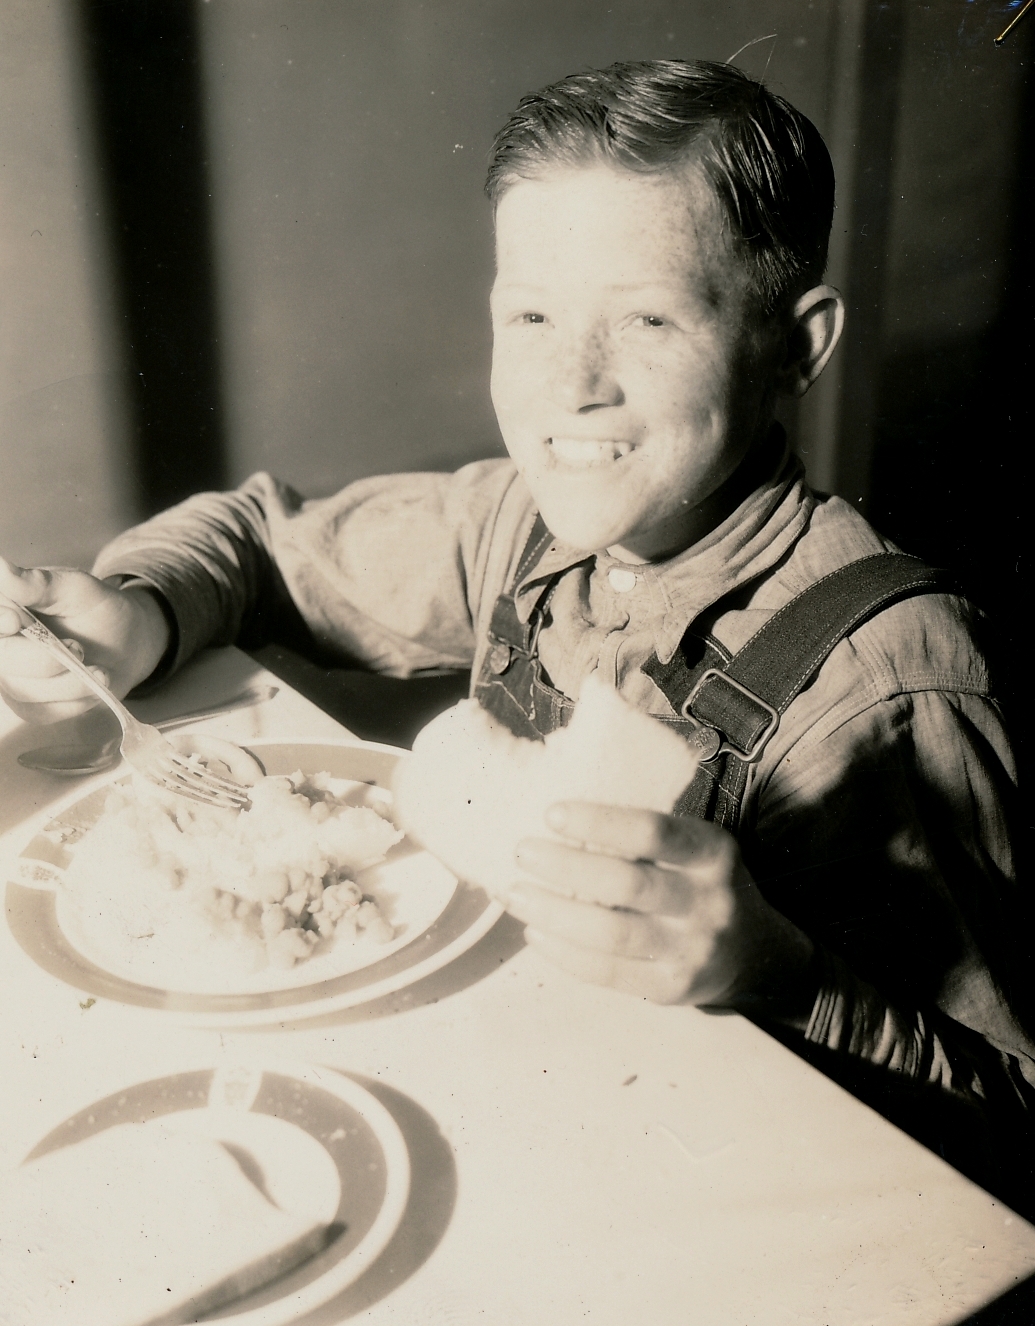 A WPA hot lunch is appreciated in Greenville, South Carolina. Photo courtesy of the National Archives (1938).